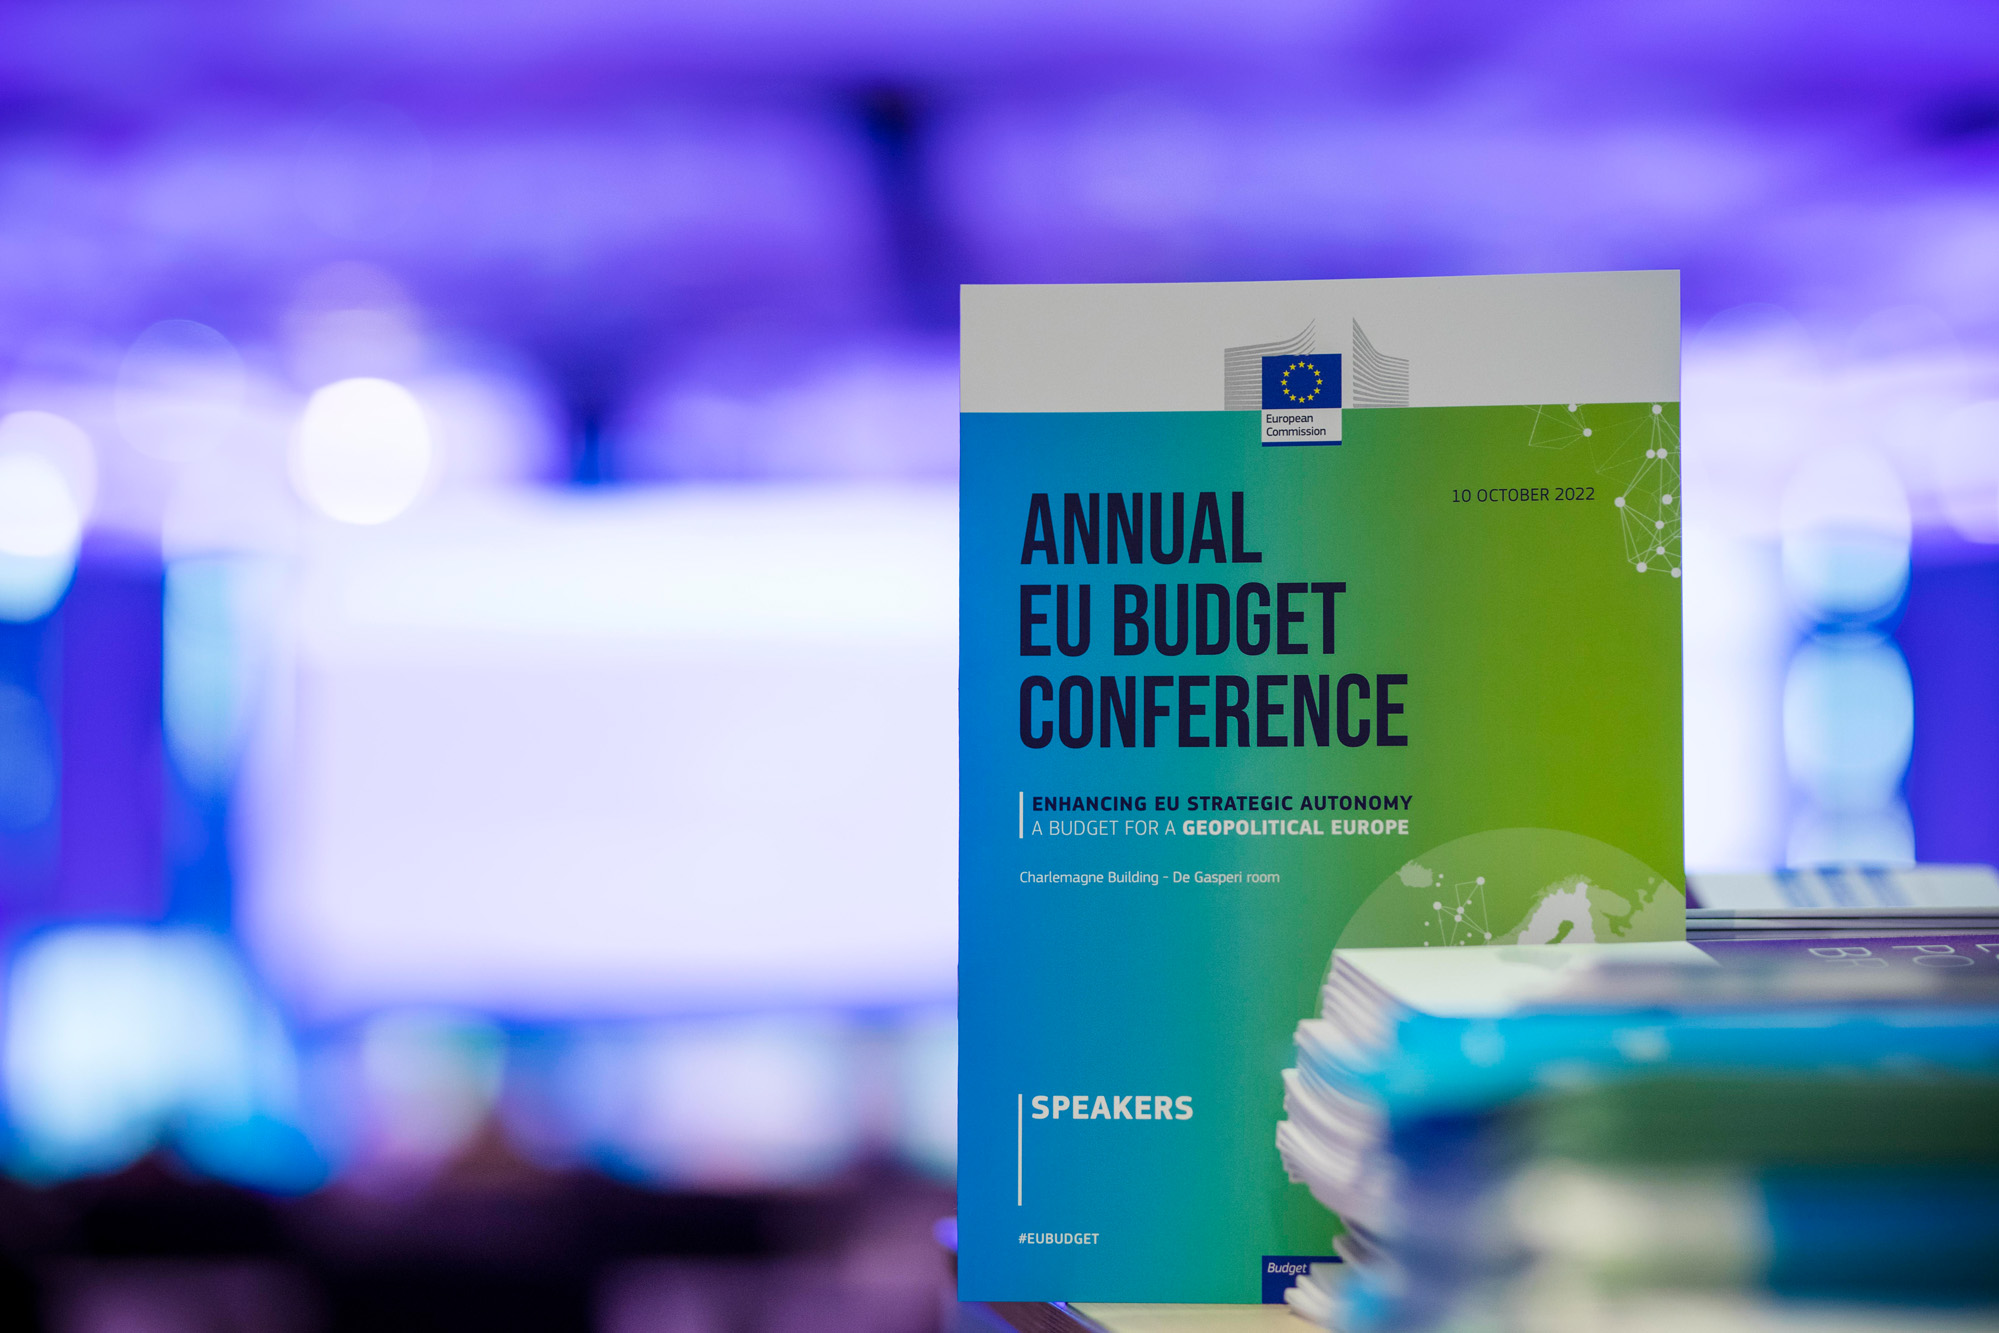 Annual EU Budget Conference 2022 - Publication with the speakers